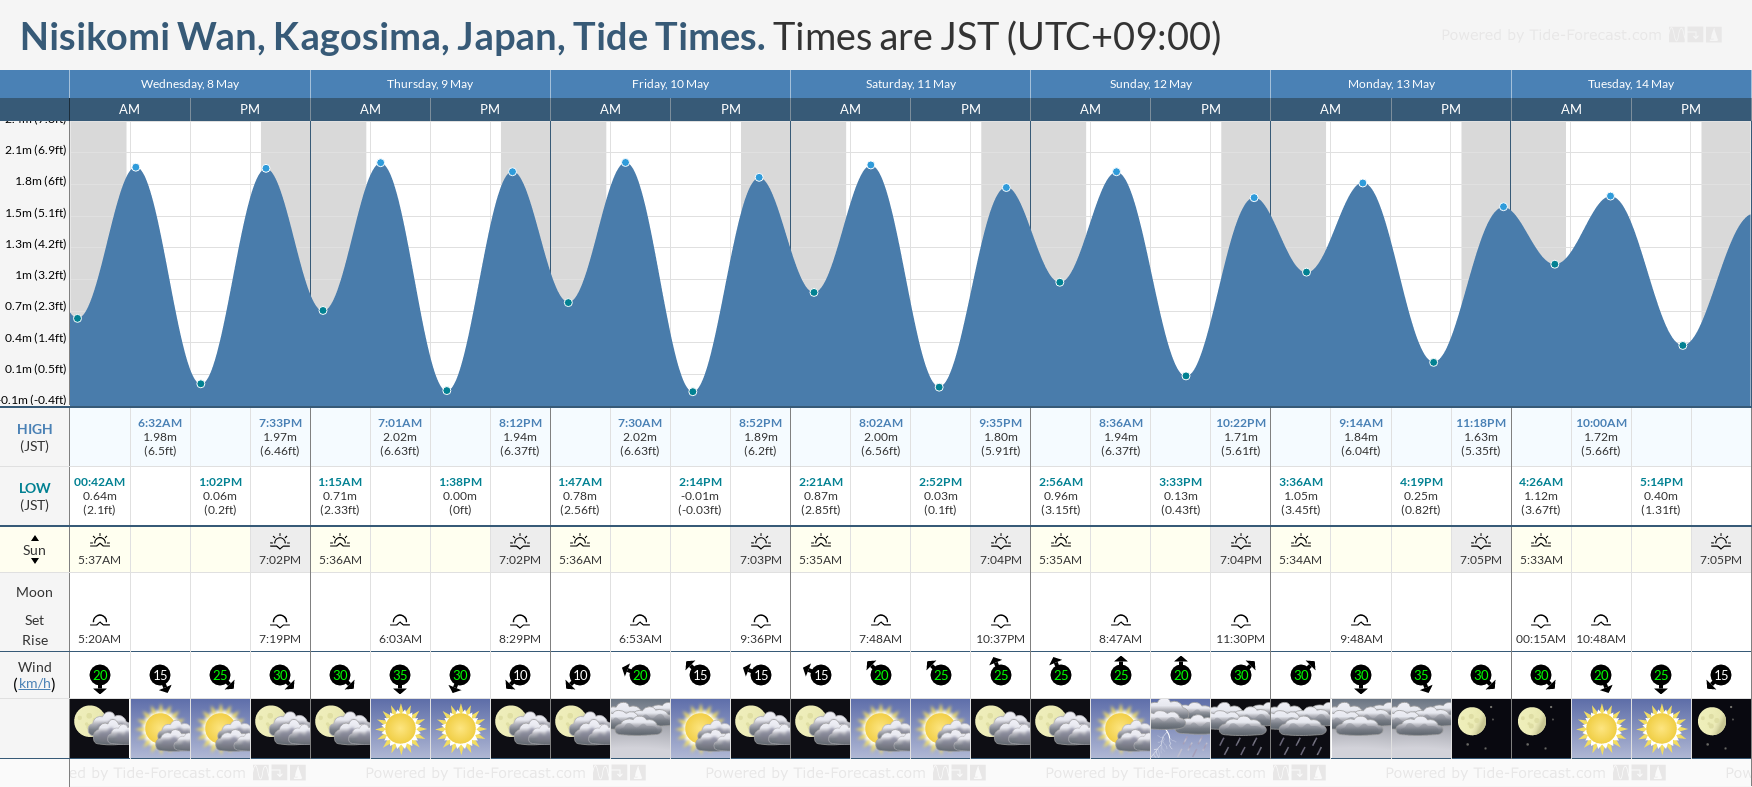 Nisikomi Wan, Kagosima, Japan Tide Chart including high and low tide tide times for the next 7 days